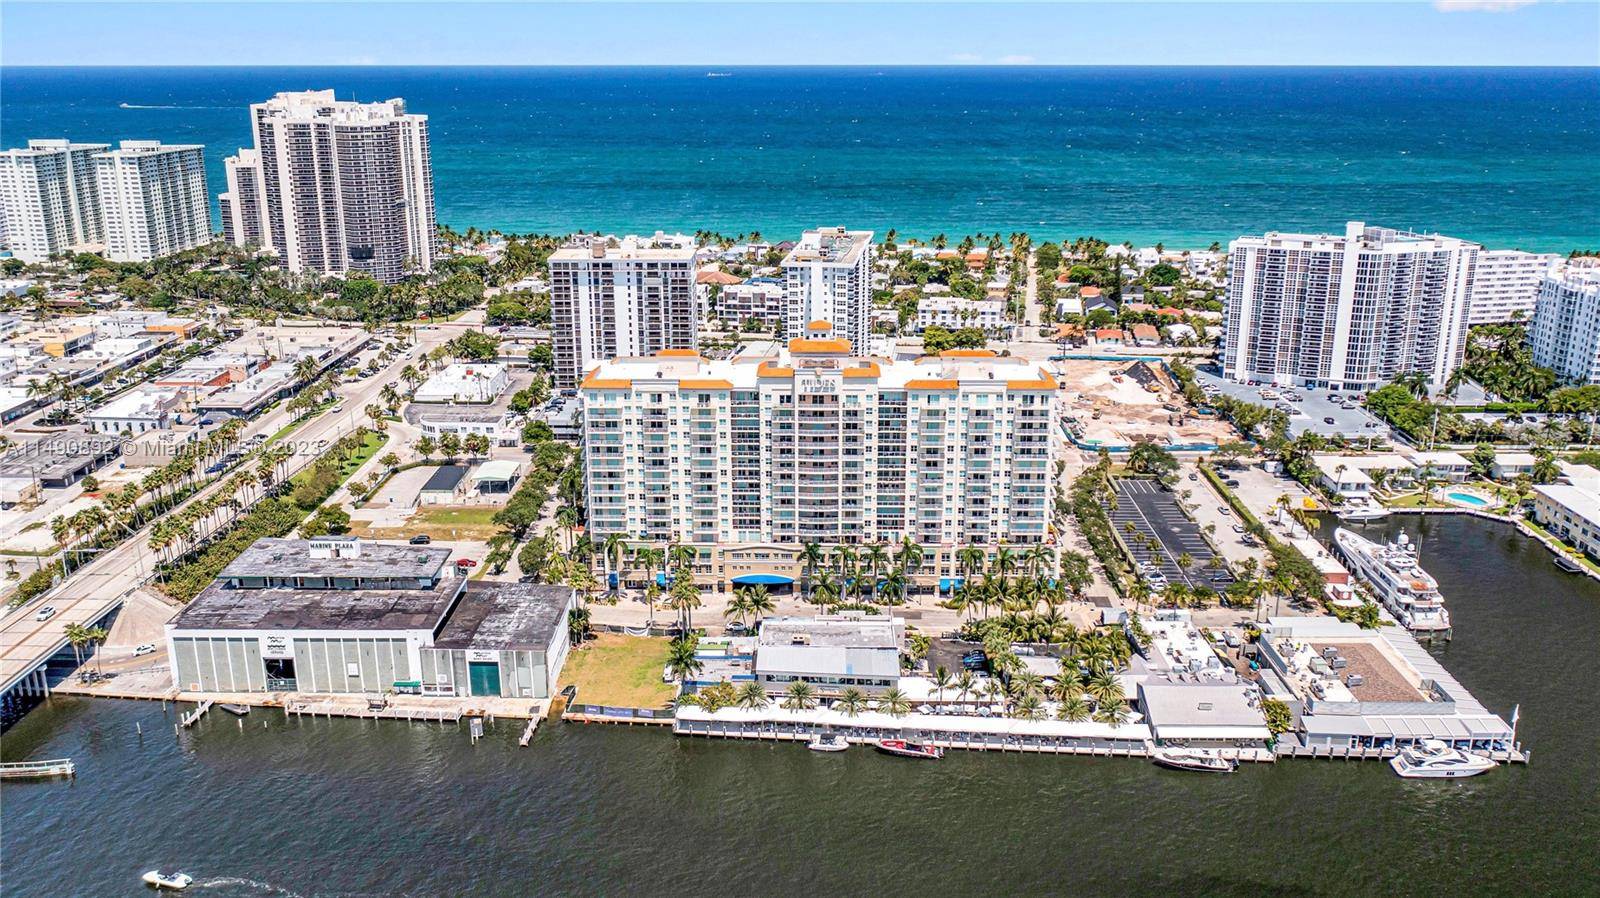 Enjoy the Florida lifestyle, two blocks from the famous Fort Lauderdale beaches in this delightful condo with ocean views from every window.